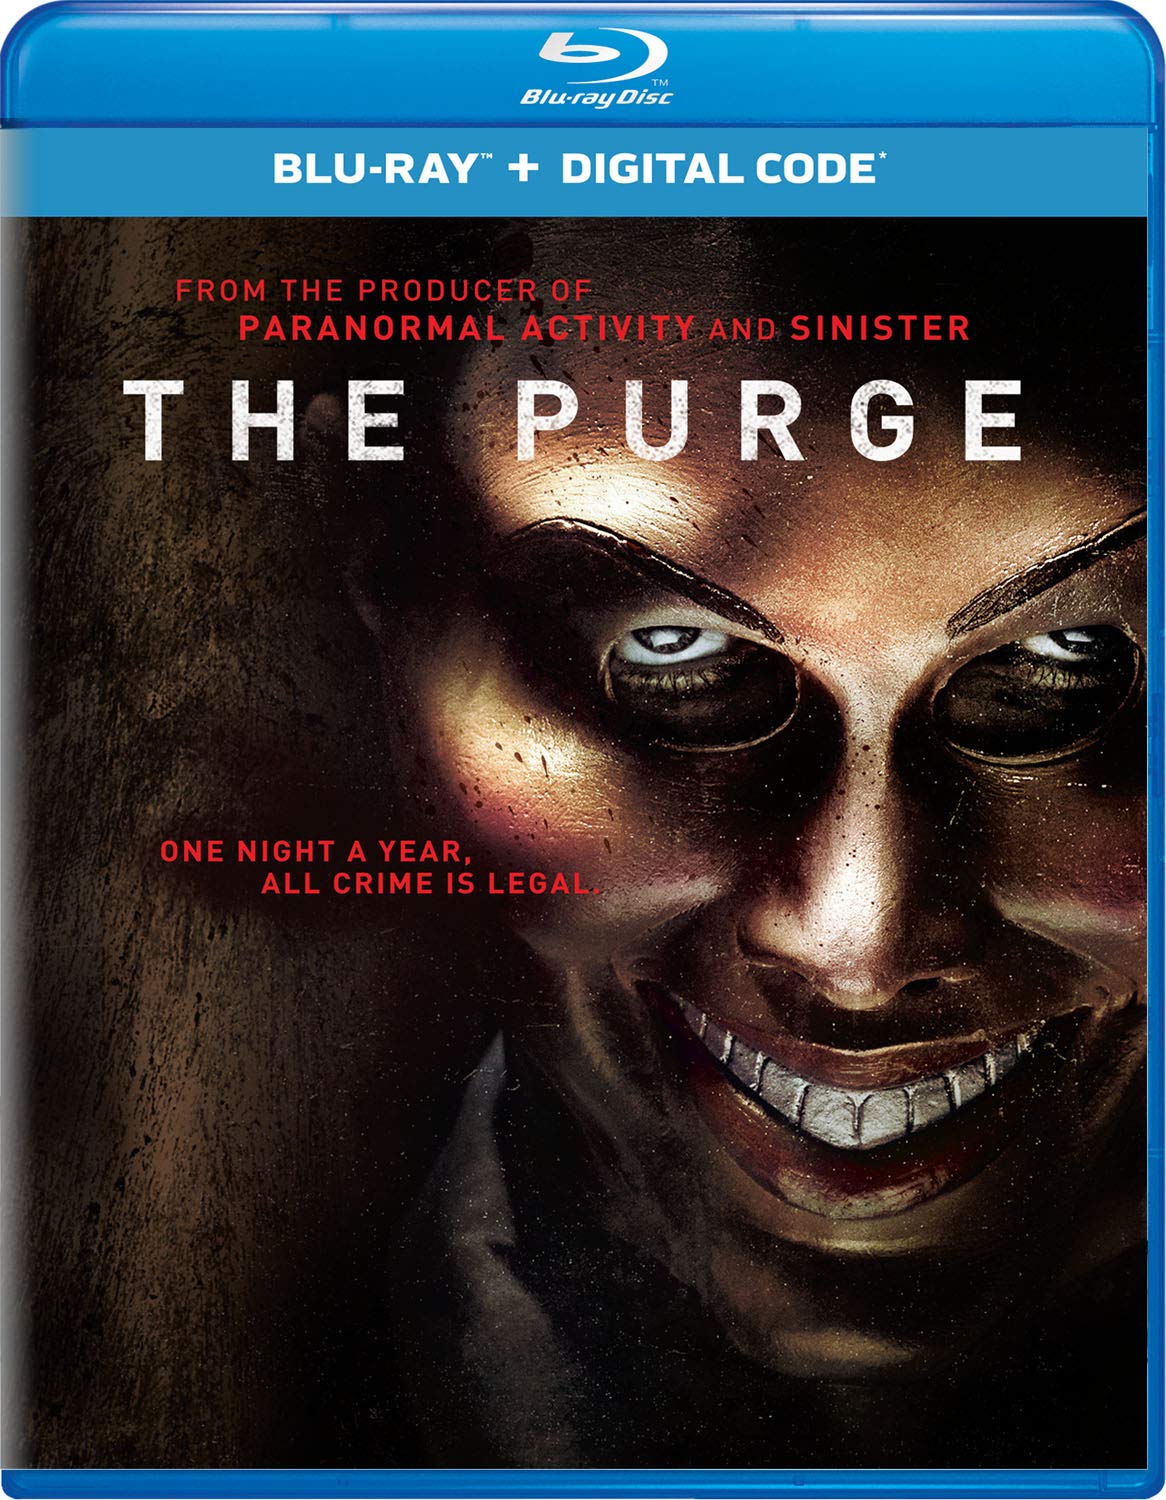 The Purge - Darkside Records